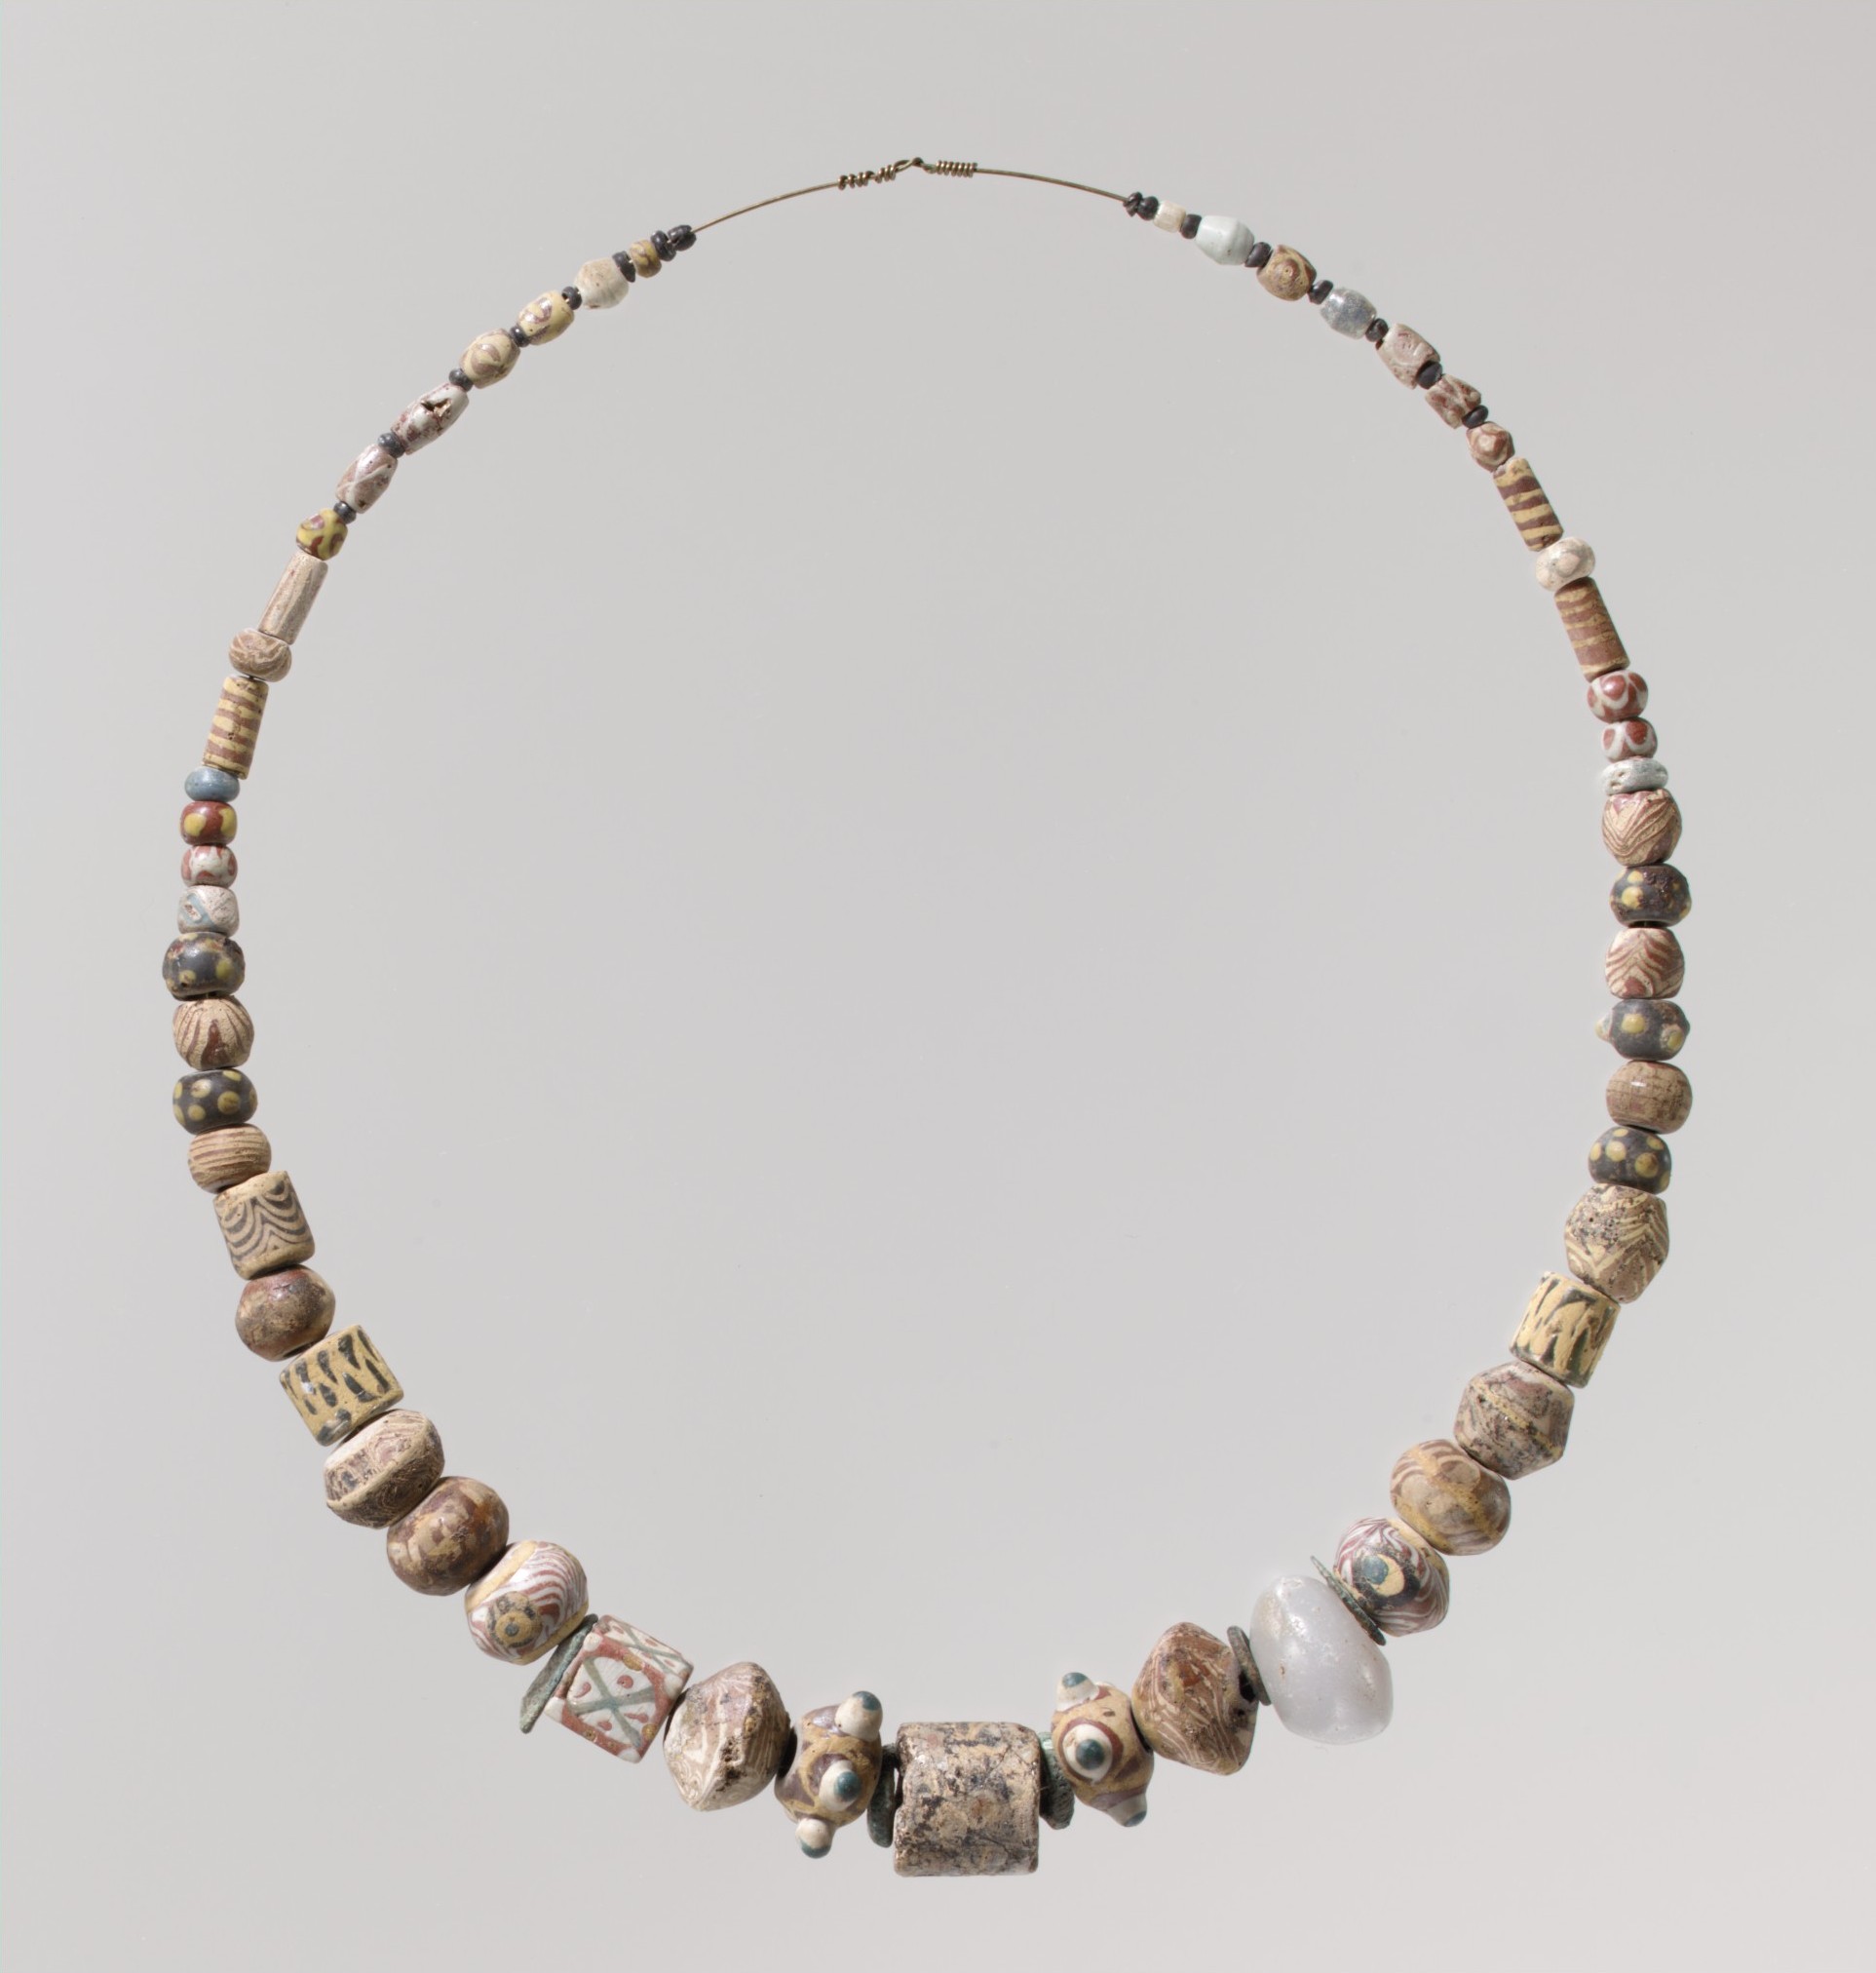 Beads from a Necklace | Frankish | The Metropolitan Museum of Art